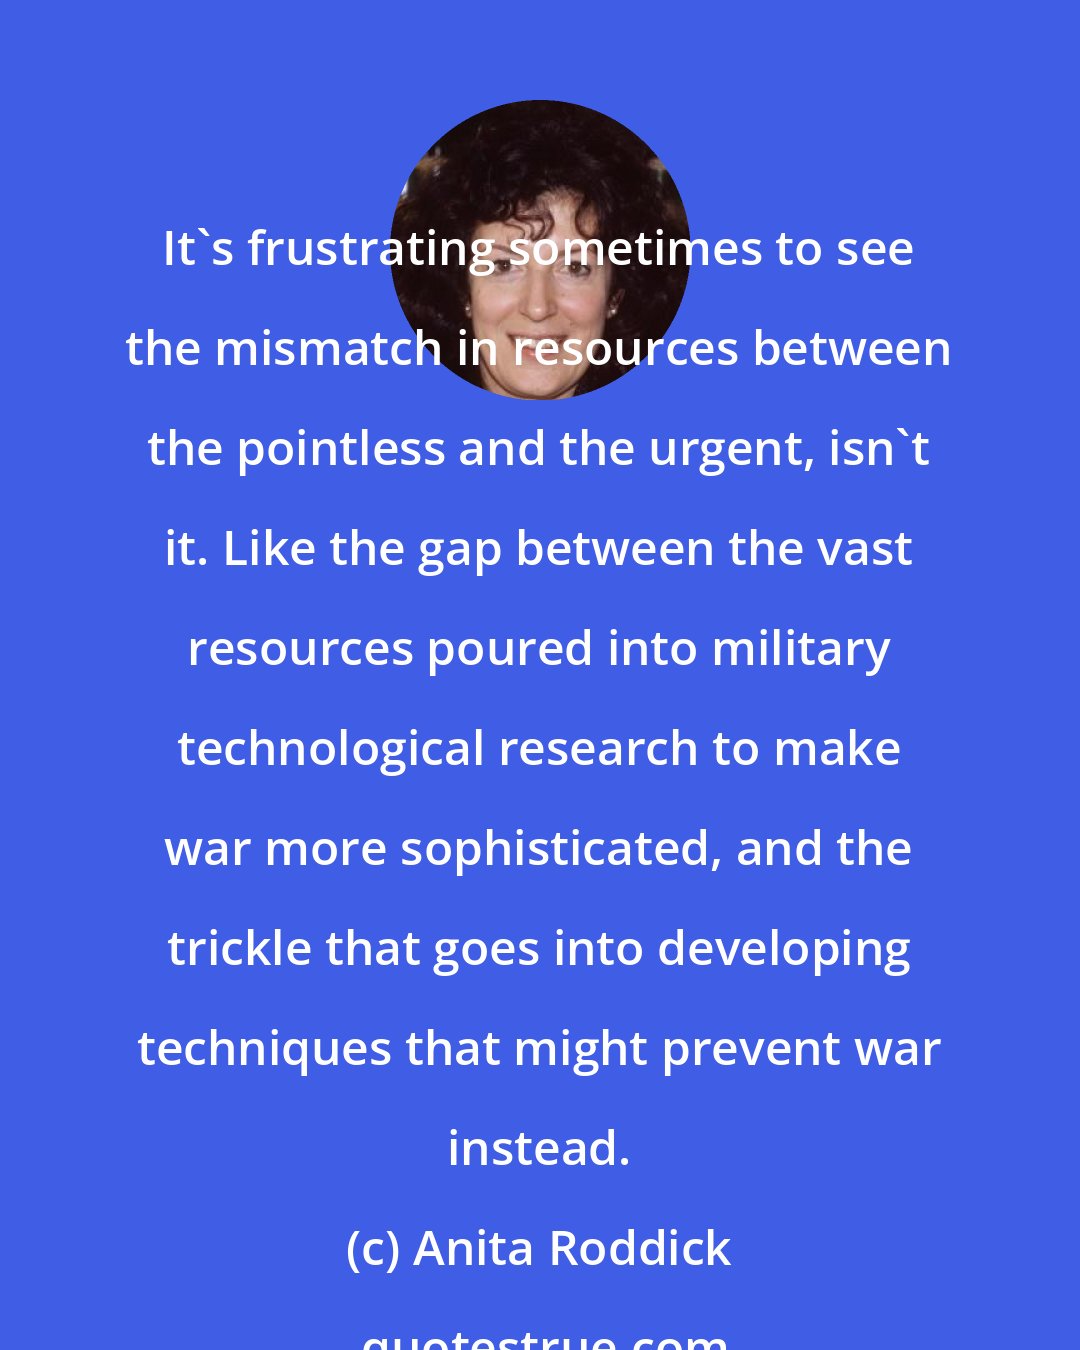 Anita Roddick: It's frustrating sometimes to see the mismatch in resources between the pointless and the urgent, isn't it. Like the gap between the vast resources poured into military technological research to make war more sophisticated, and the trickle that goes into developing techniques that might prevent war instead.